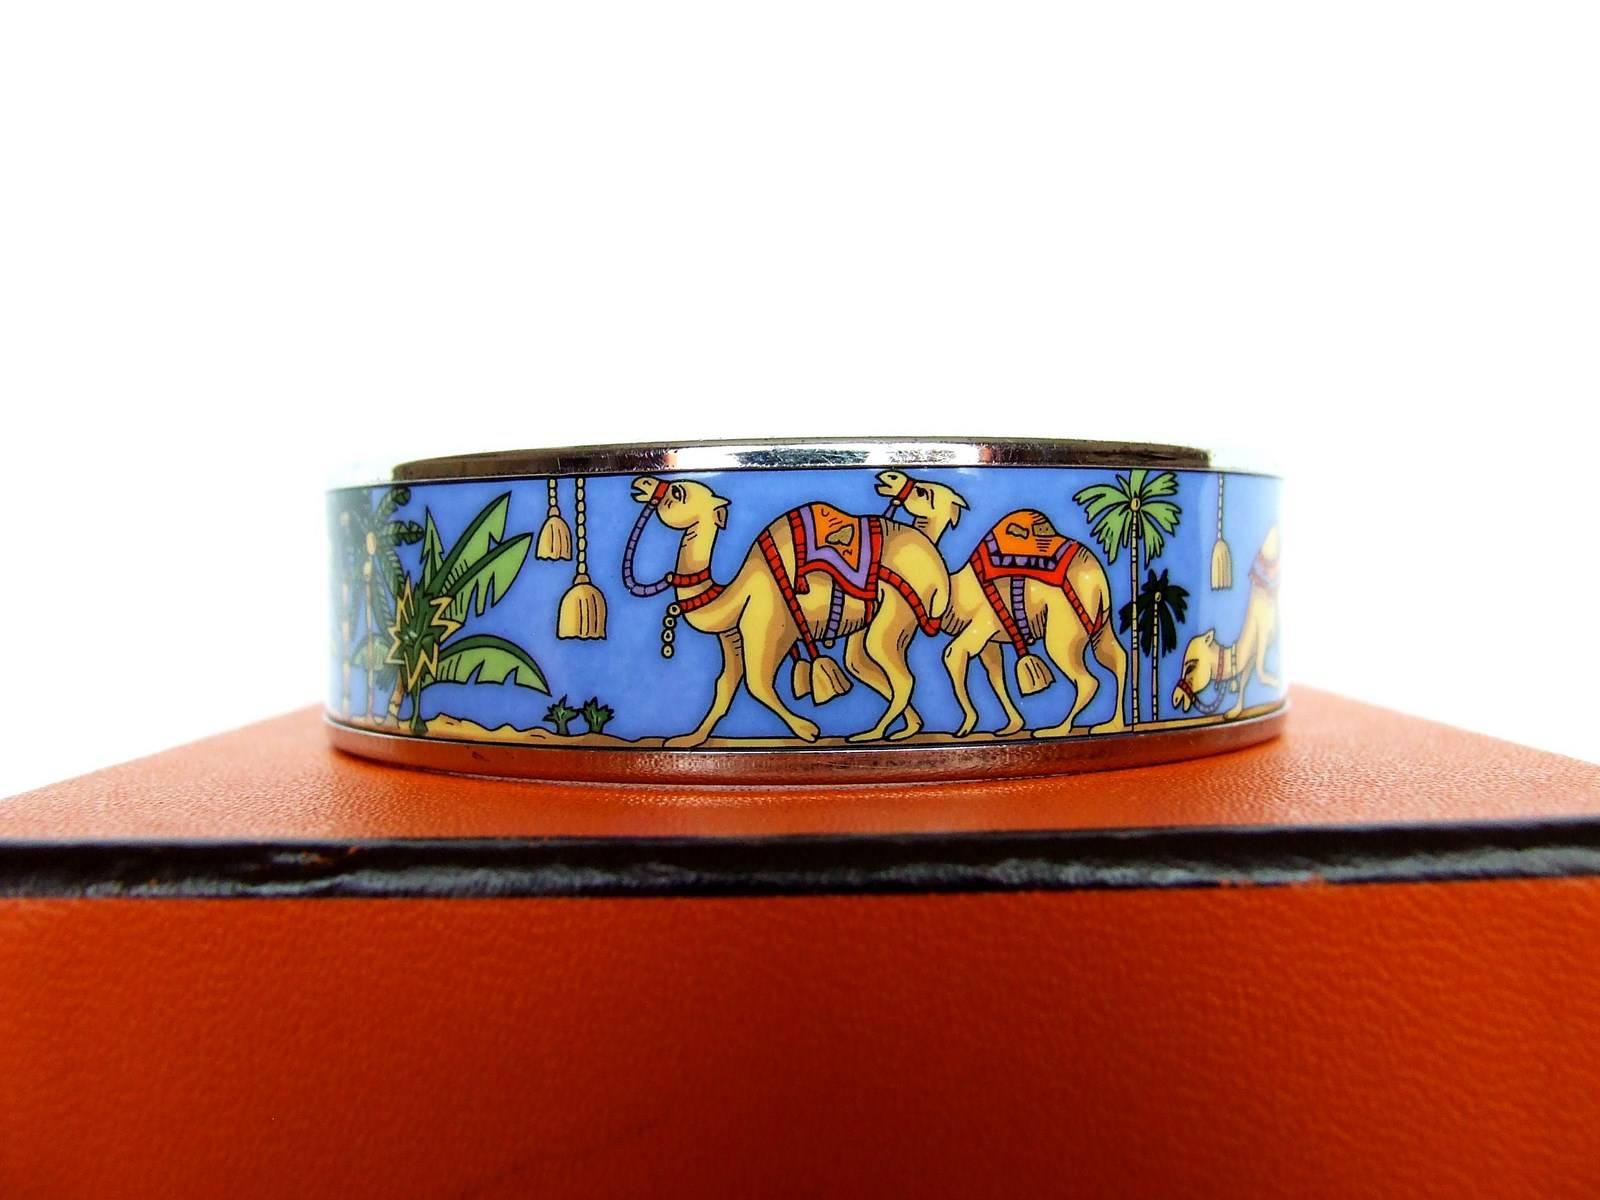 RARE AND BEAUTIFUL AUTHENTIC HERMES BRACELET

Pattern: Camels in Desert

Made in Austria 

Stamp E for 2001

Made of Printed Enamel and Palladium Plated Hardware (Silver-tone)

Colors: Blue Background, Beige Camels and Green Palm